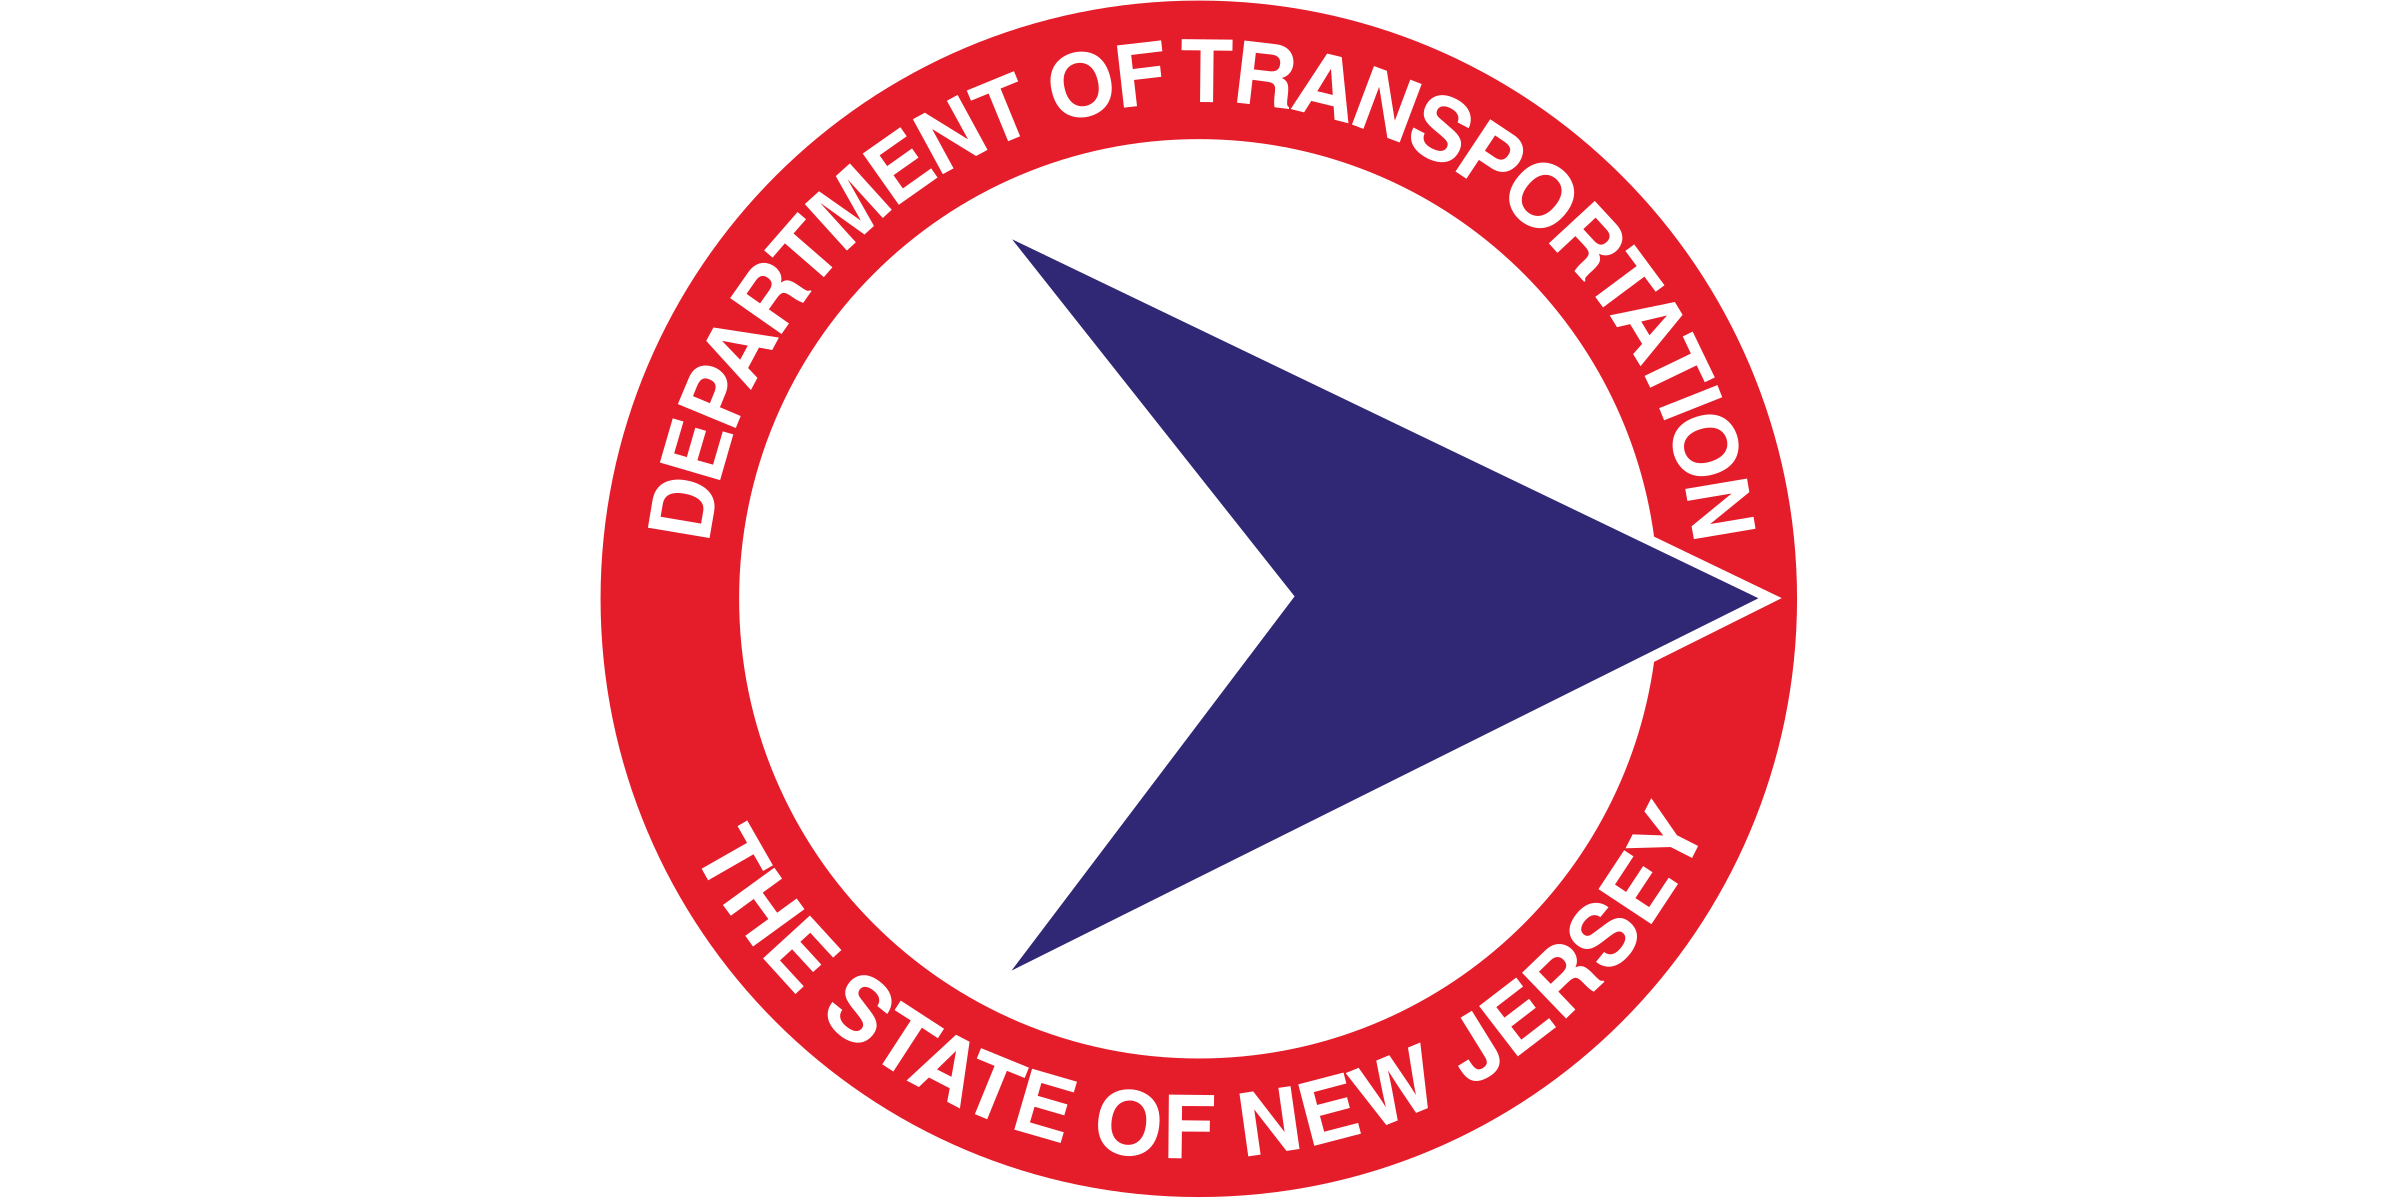 Virtual Public Information Center Hosted by the Department of Transportation